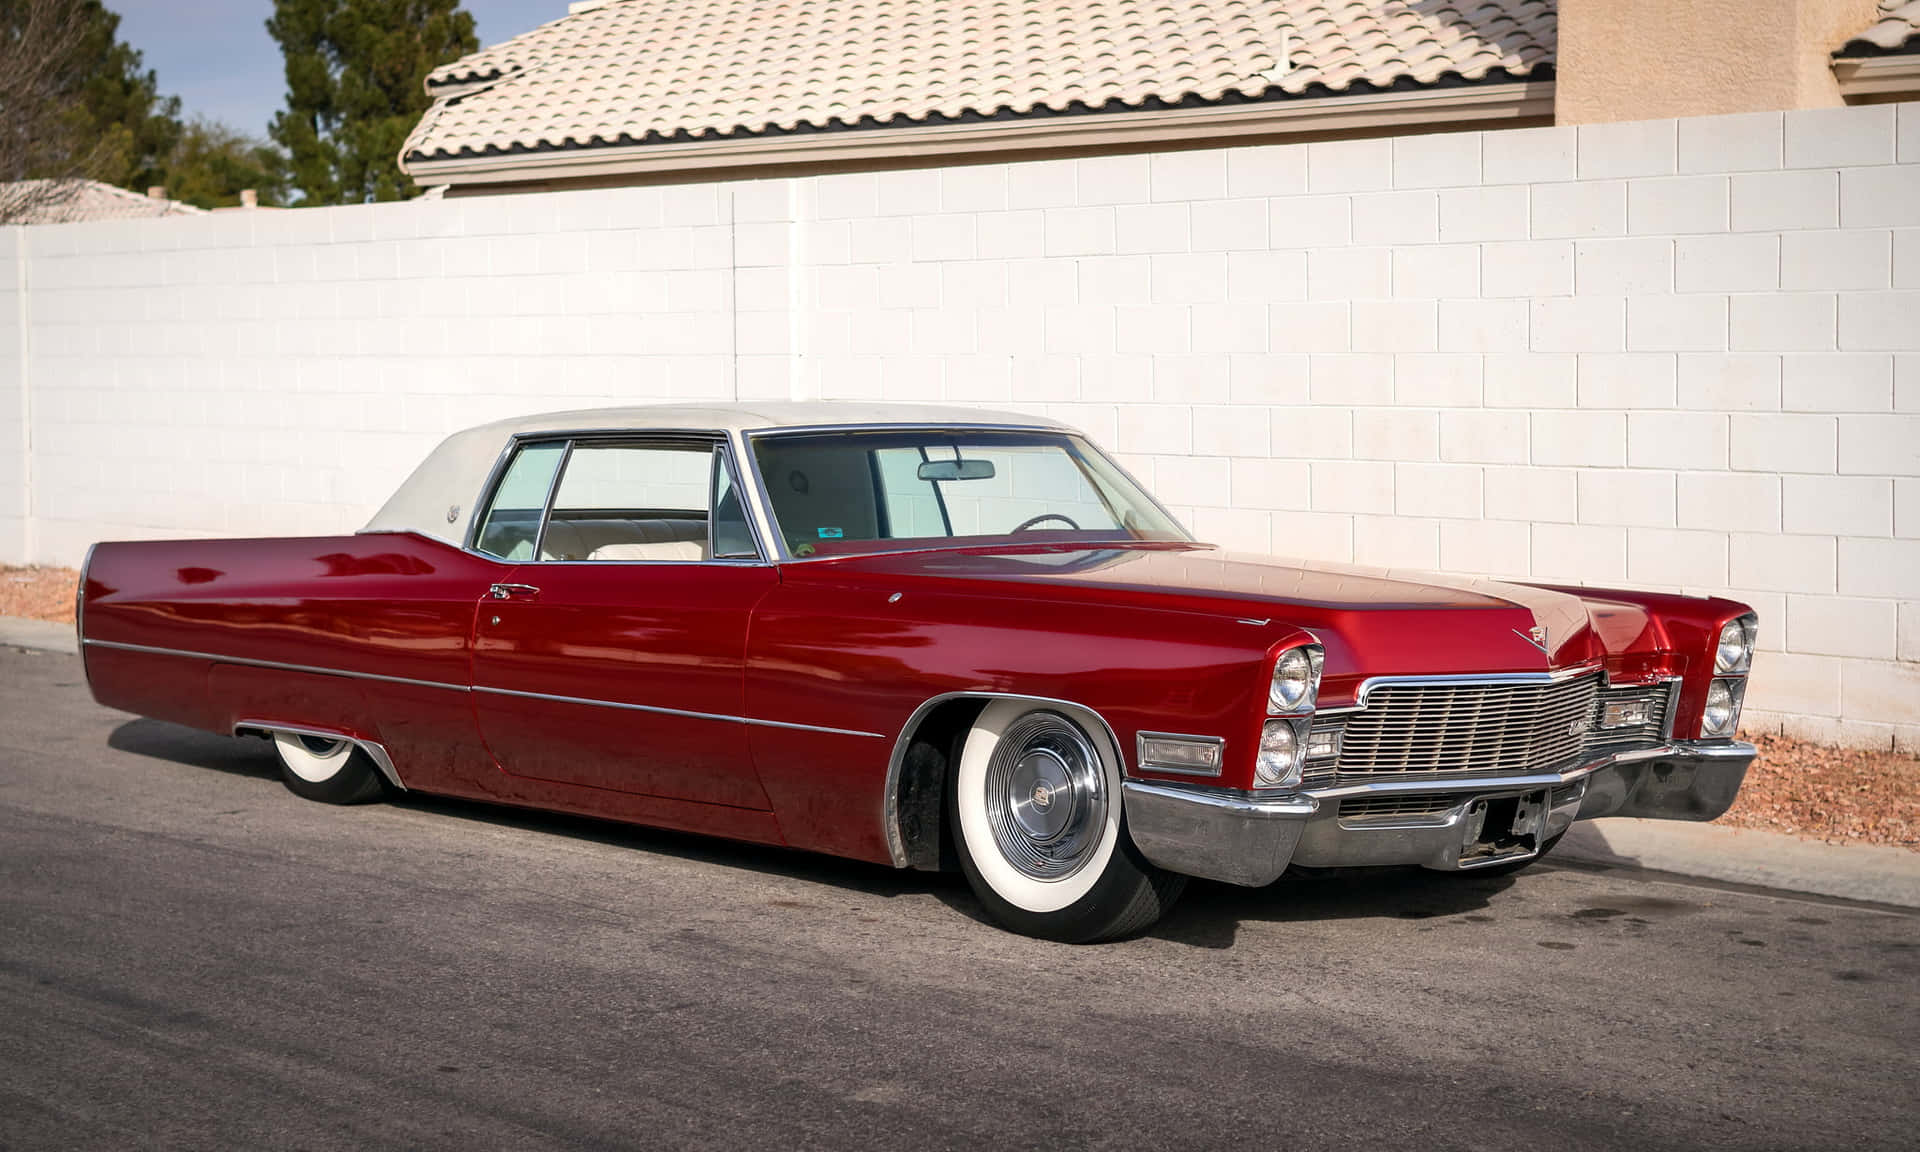 A Stunning Cadillac Deville Wallpaper with Vibrant Colors Wallpaper